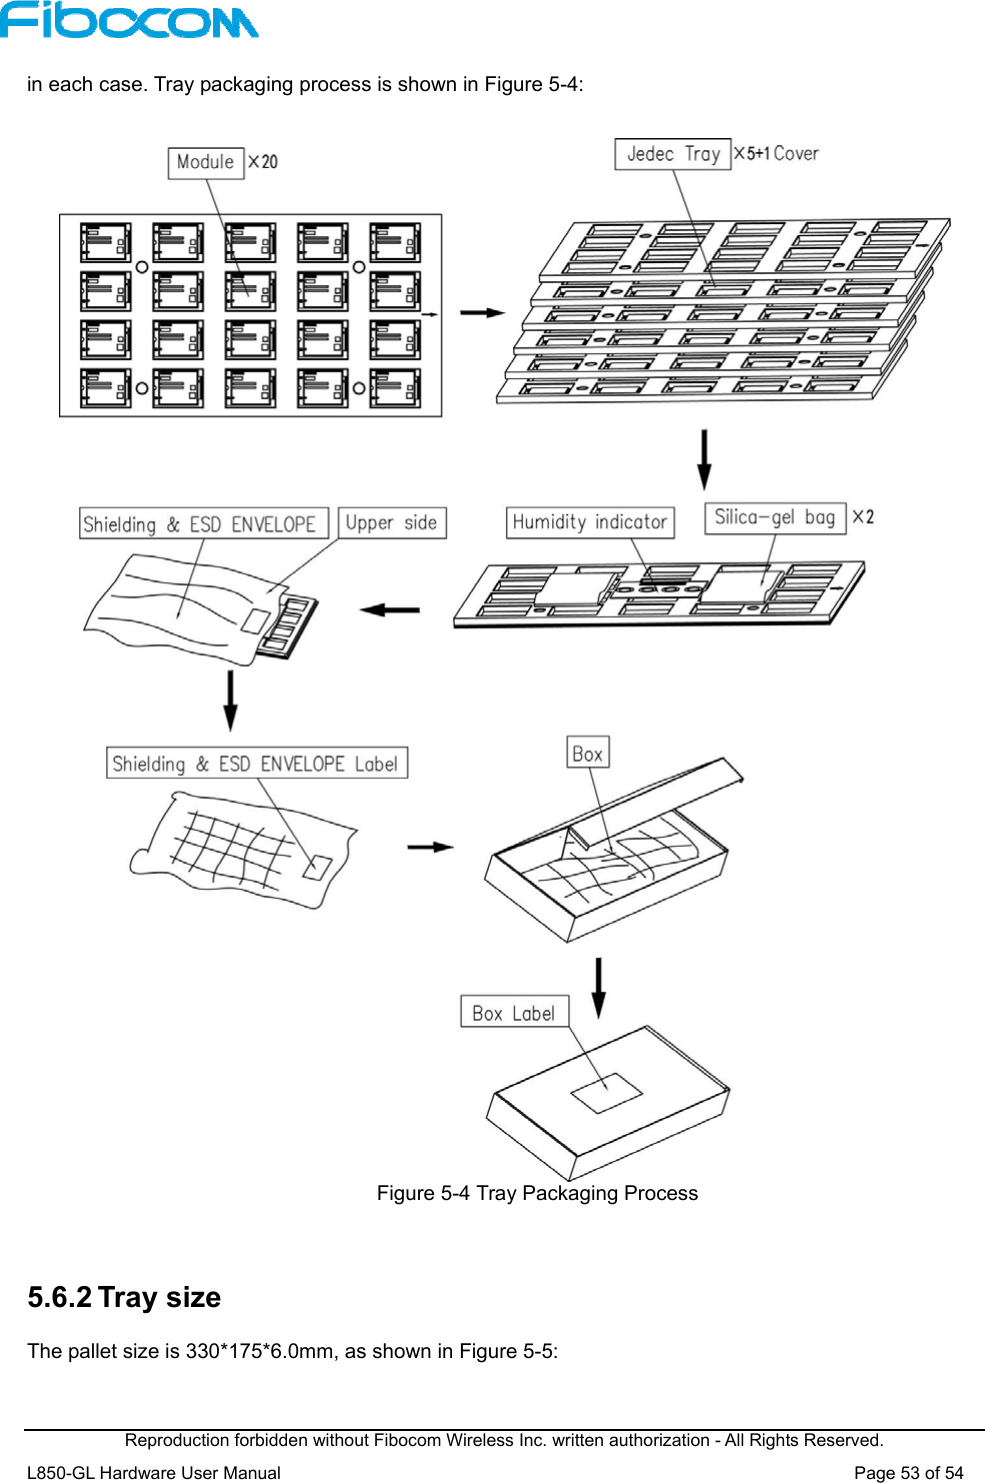  Reproduction forbidden without Fibocom Wireless Inc. written authorization - All Rights Reserved. L850-GL Hardware User Manual                                                                 Page 53 of 54 in each case. Tray packaging process is shown in Figure 5-4:     Figure 5-4 Tray Packaging Process  5.6.2 Tray size The pallet size is 330*175*6.0mm, as shown in Figure 5-5:    